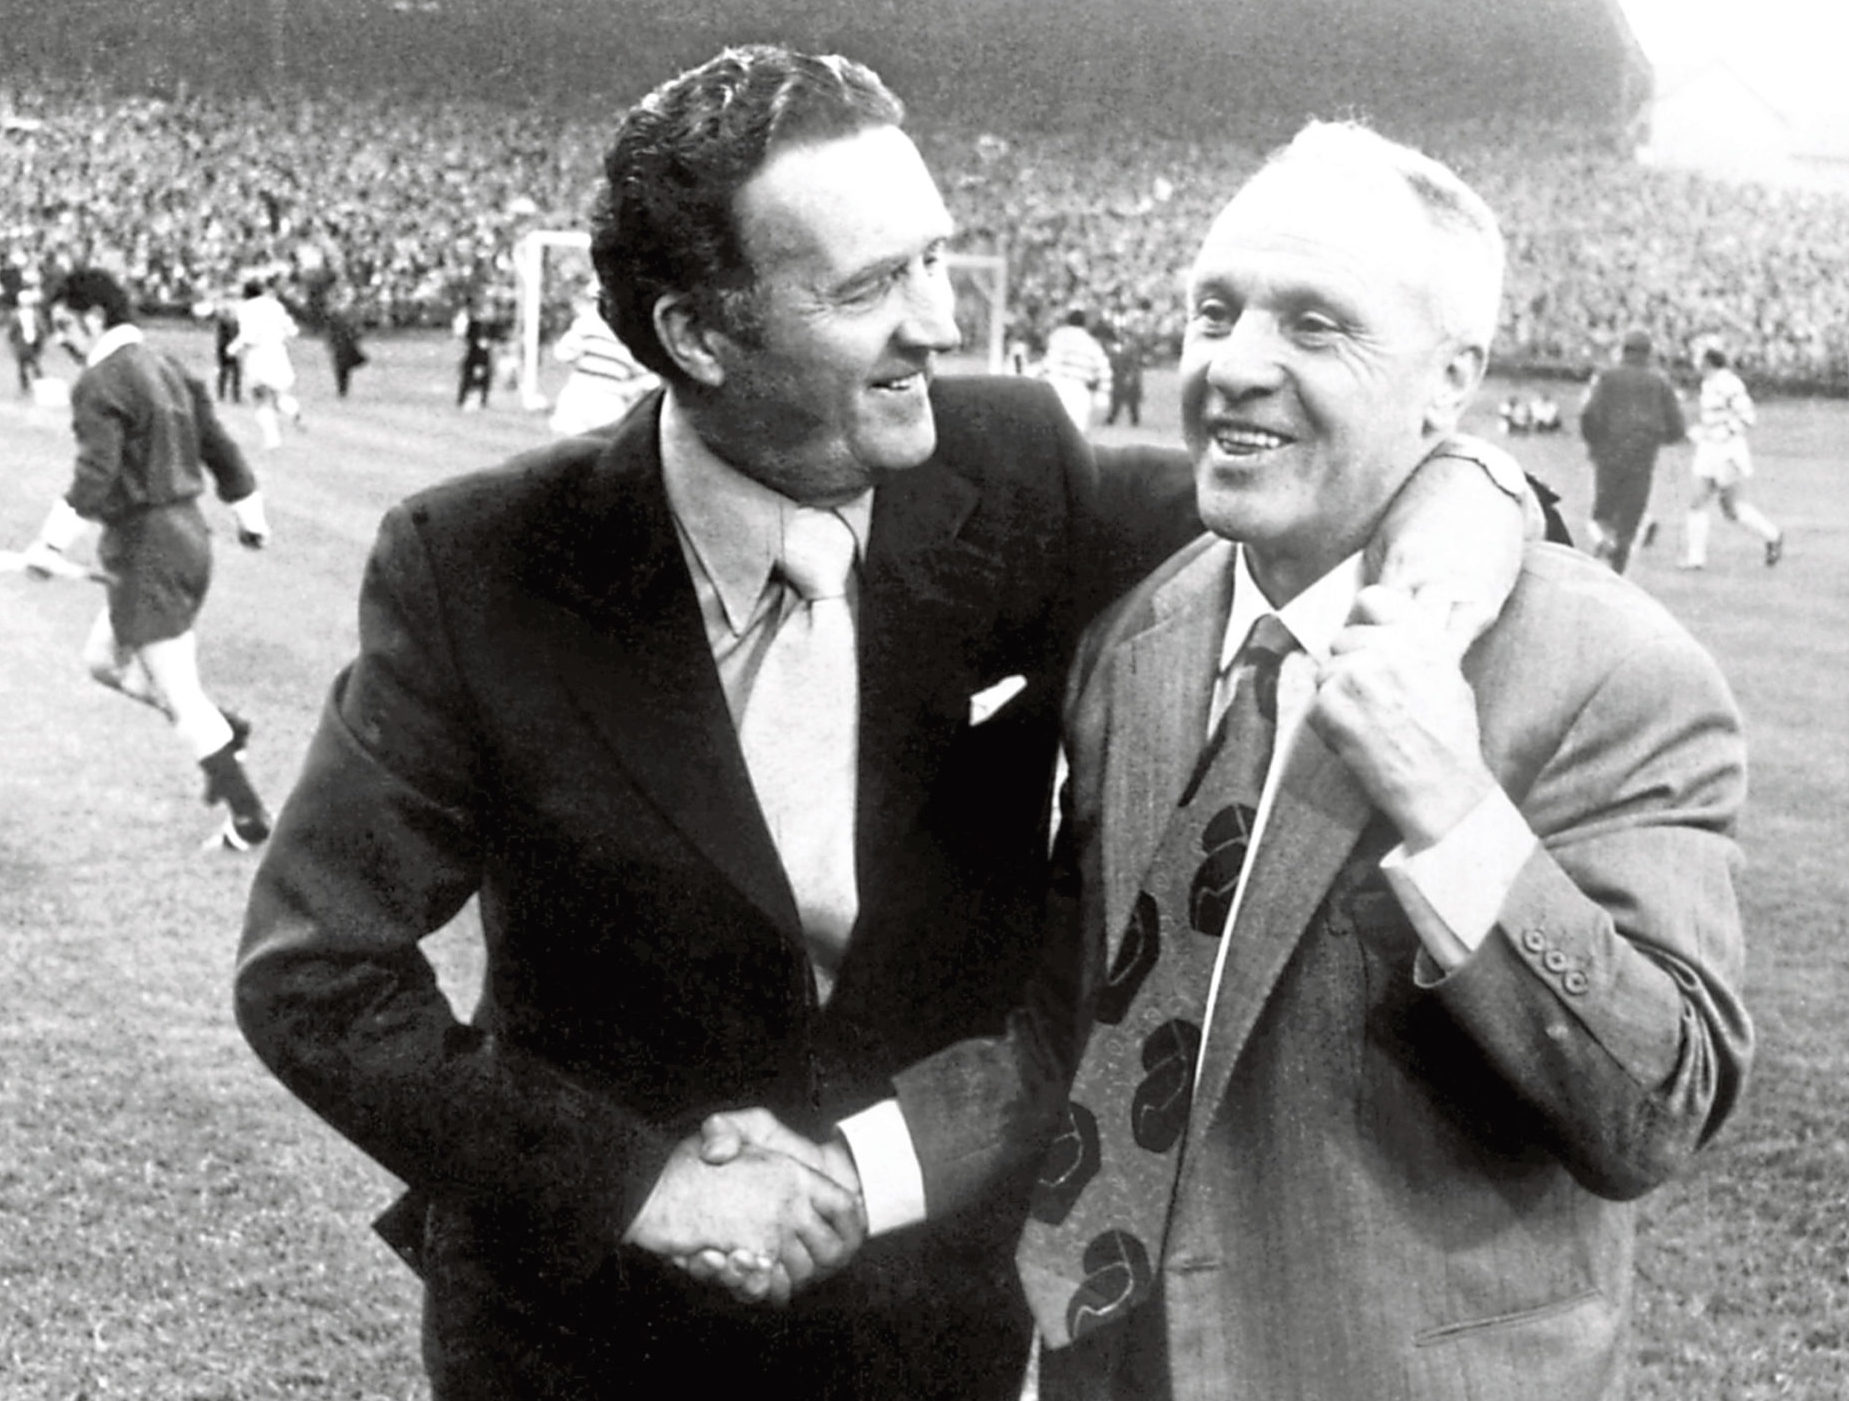 (L-R) Celtic manager Jock Stein renews his acquaintance with Liverpool manager Bill Shankly before the match.